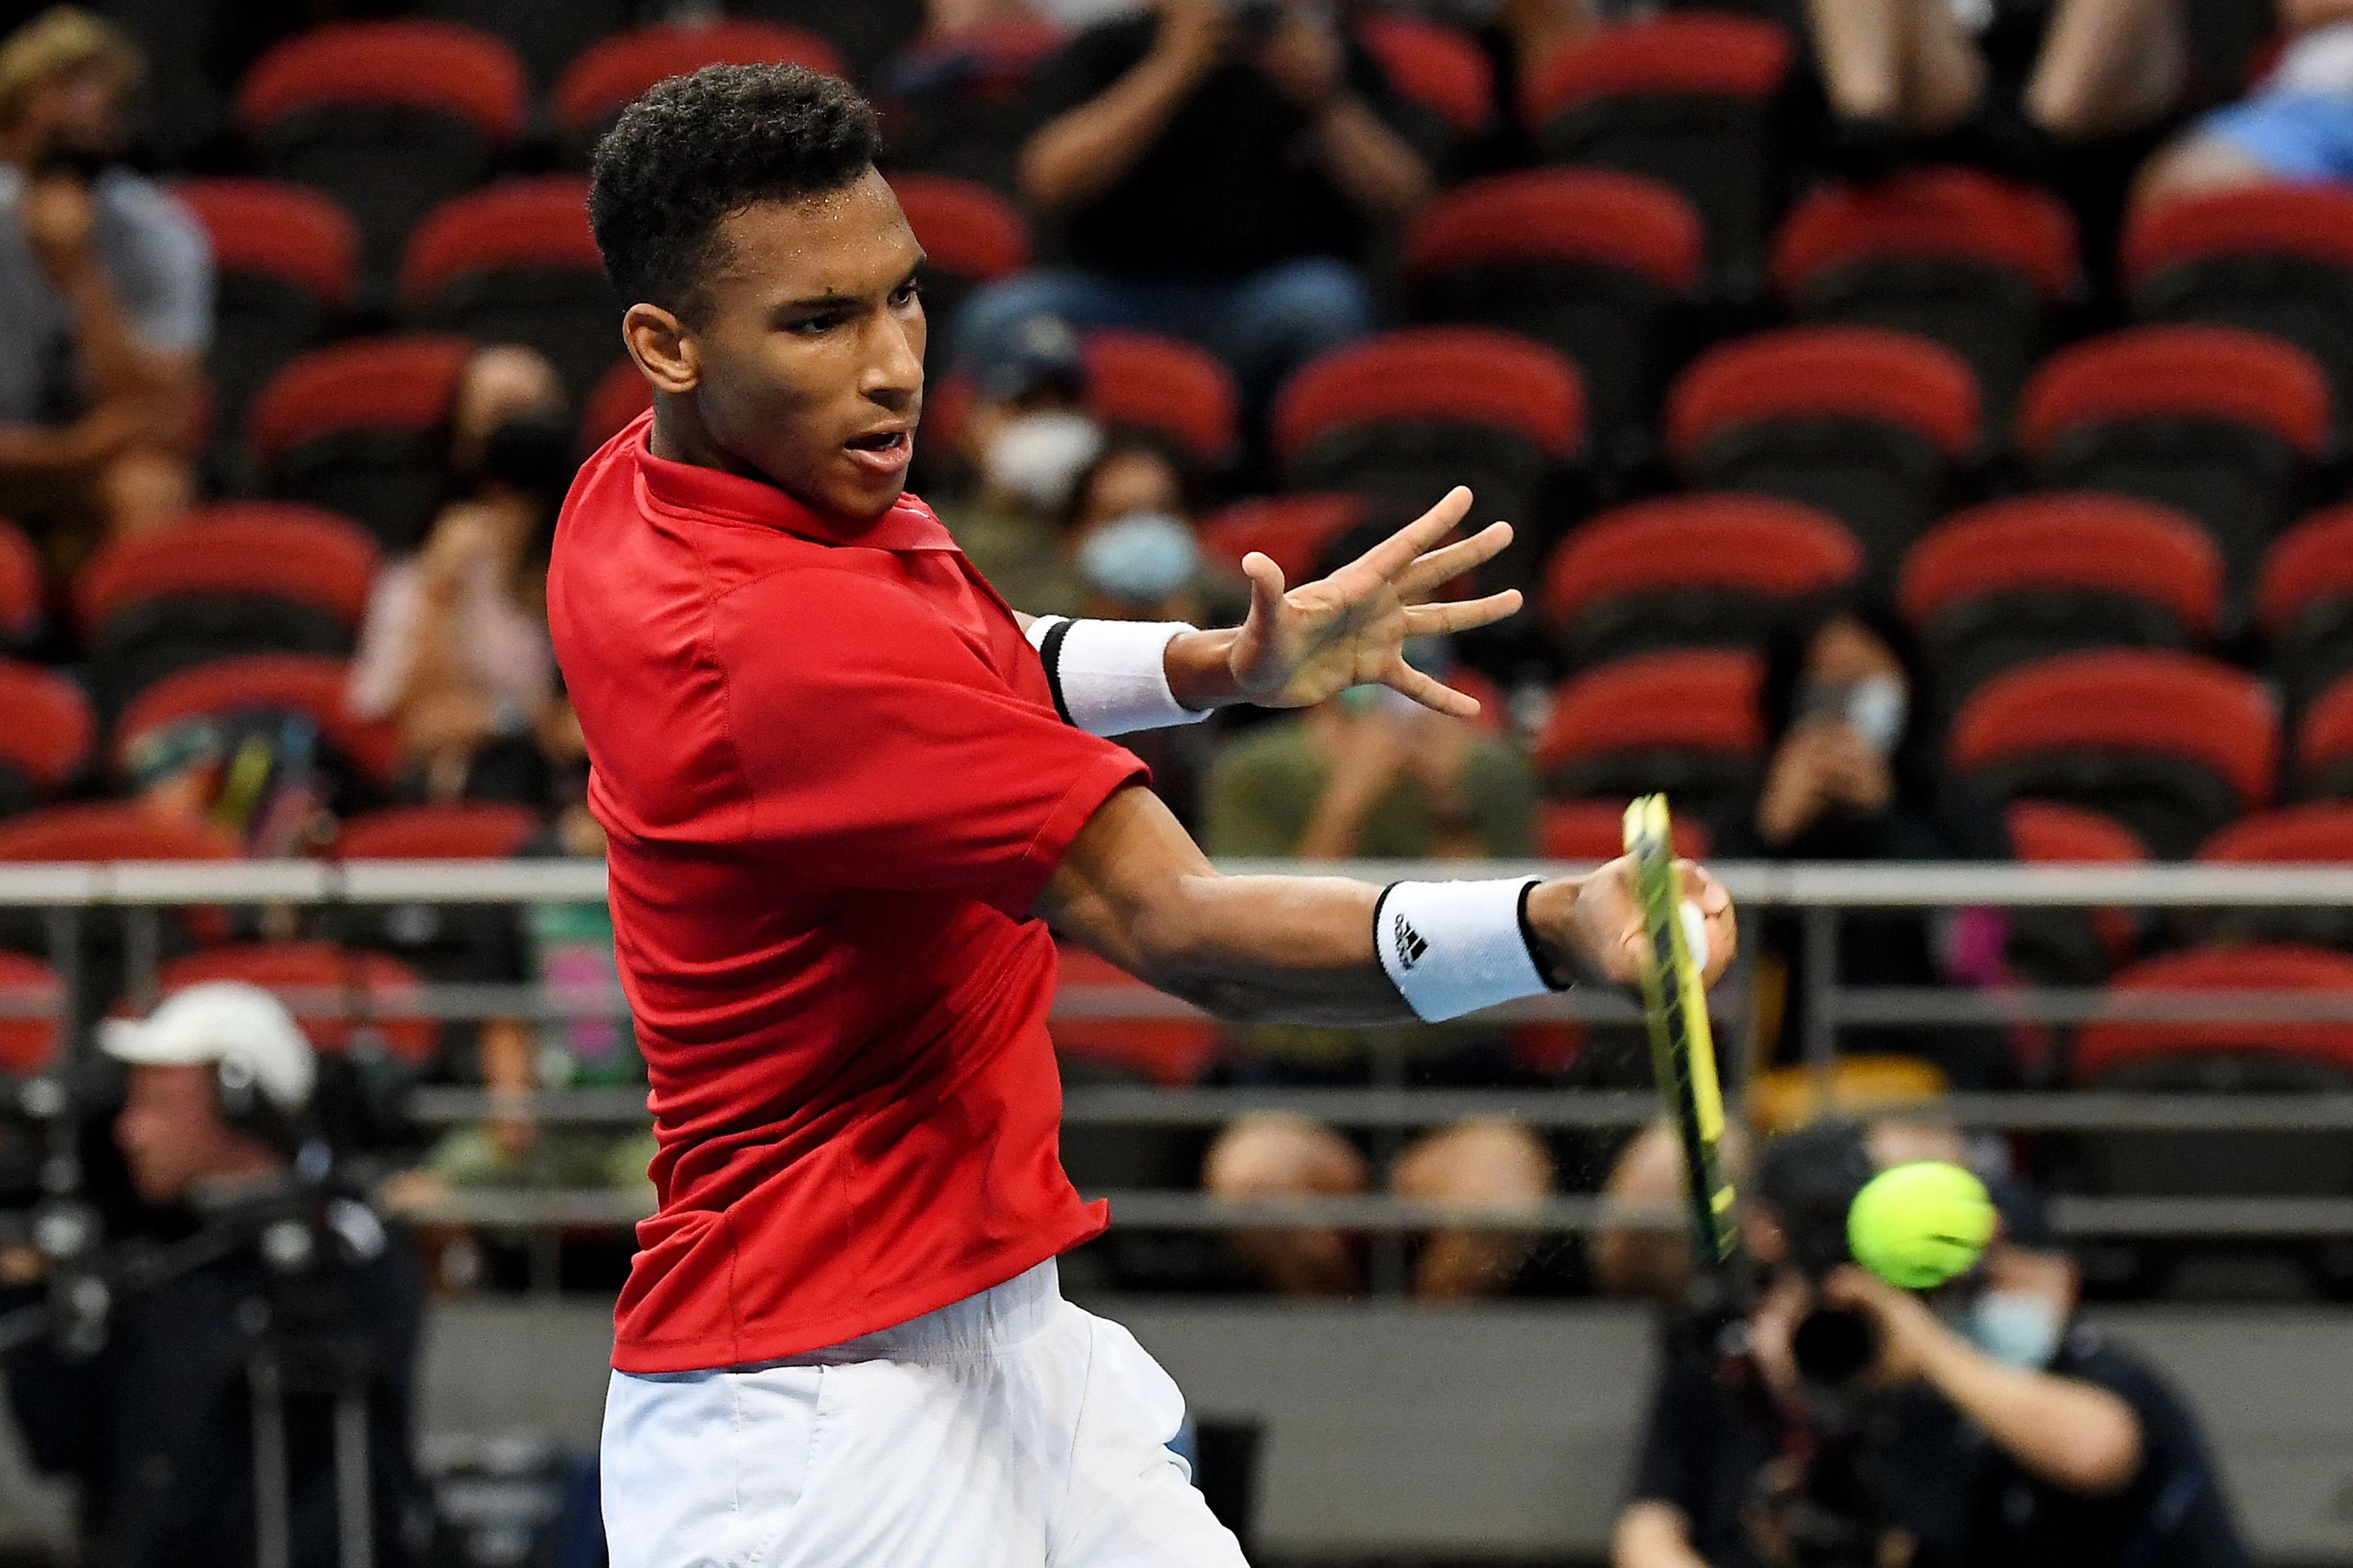 Canada beats Germany to join Russia in ATP Cup semi-finals